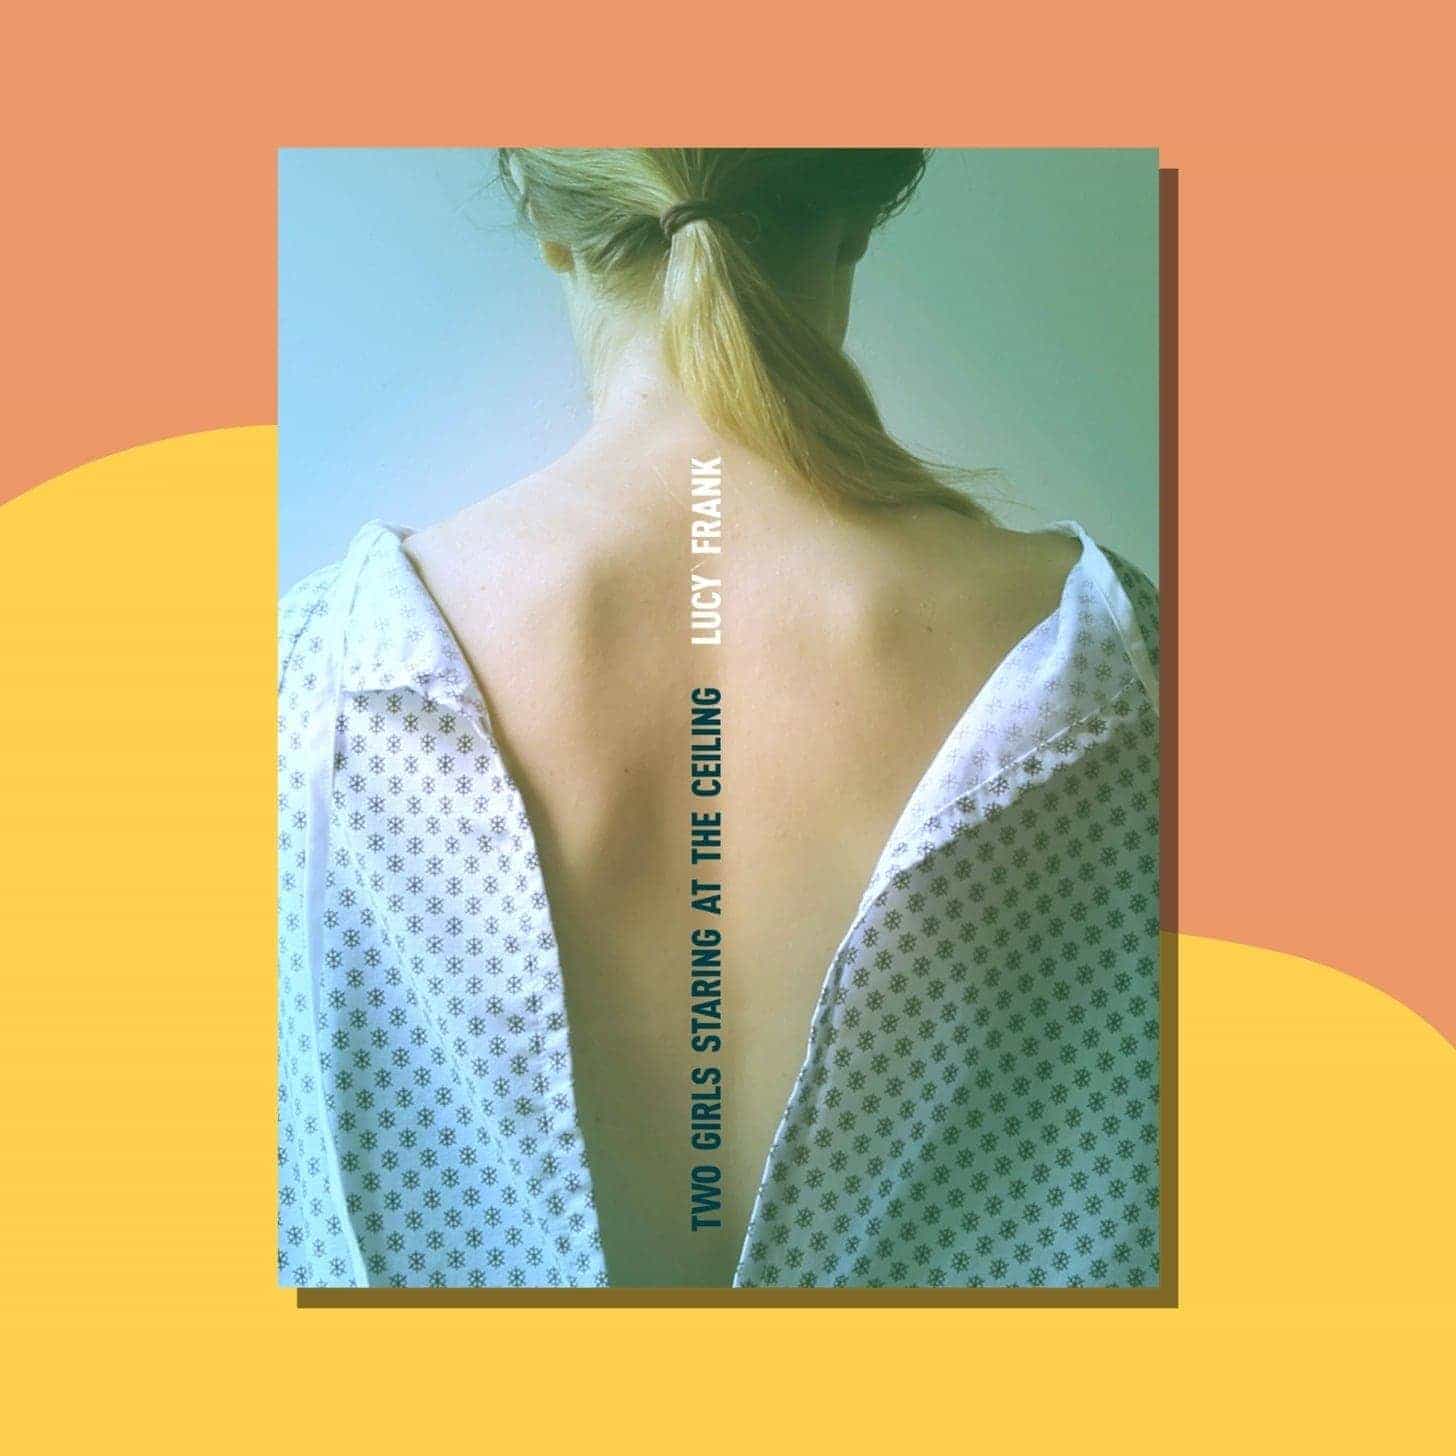 “Two Girls Staring at the Ceiling” by Lucy Frank - Cover is the back of a woman's back, wearing a hospital gown, with the title typed sideways along her spine